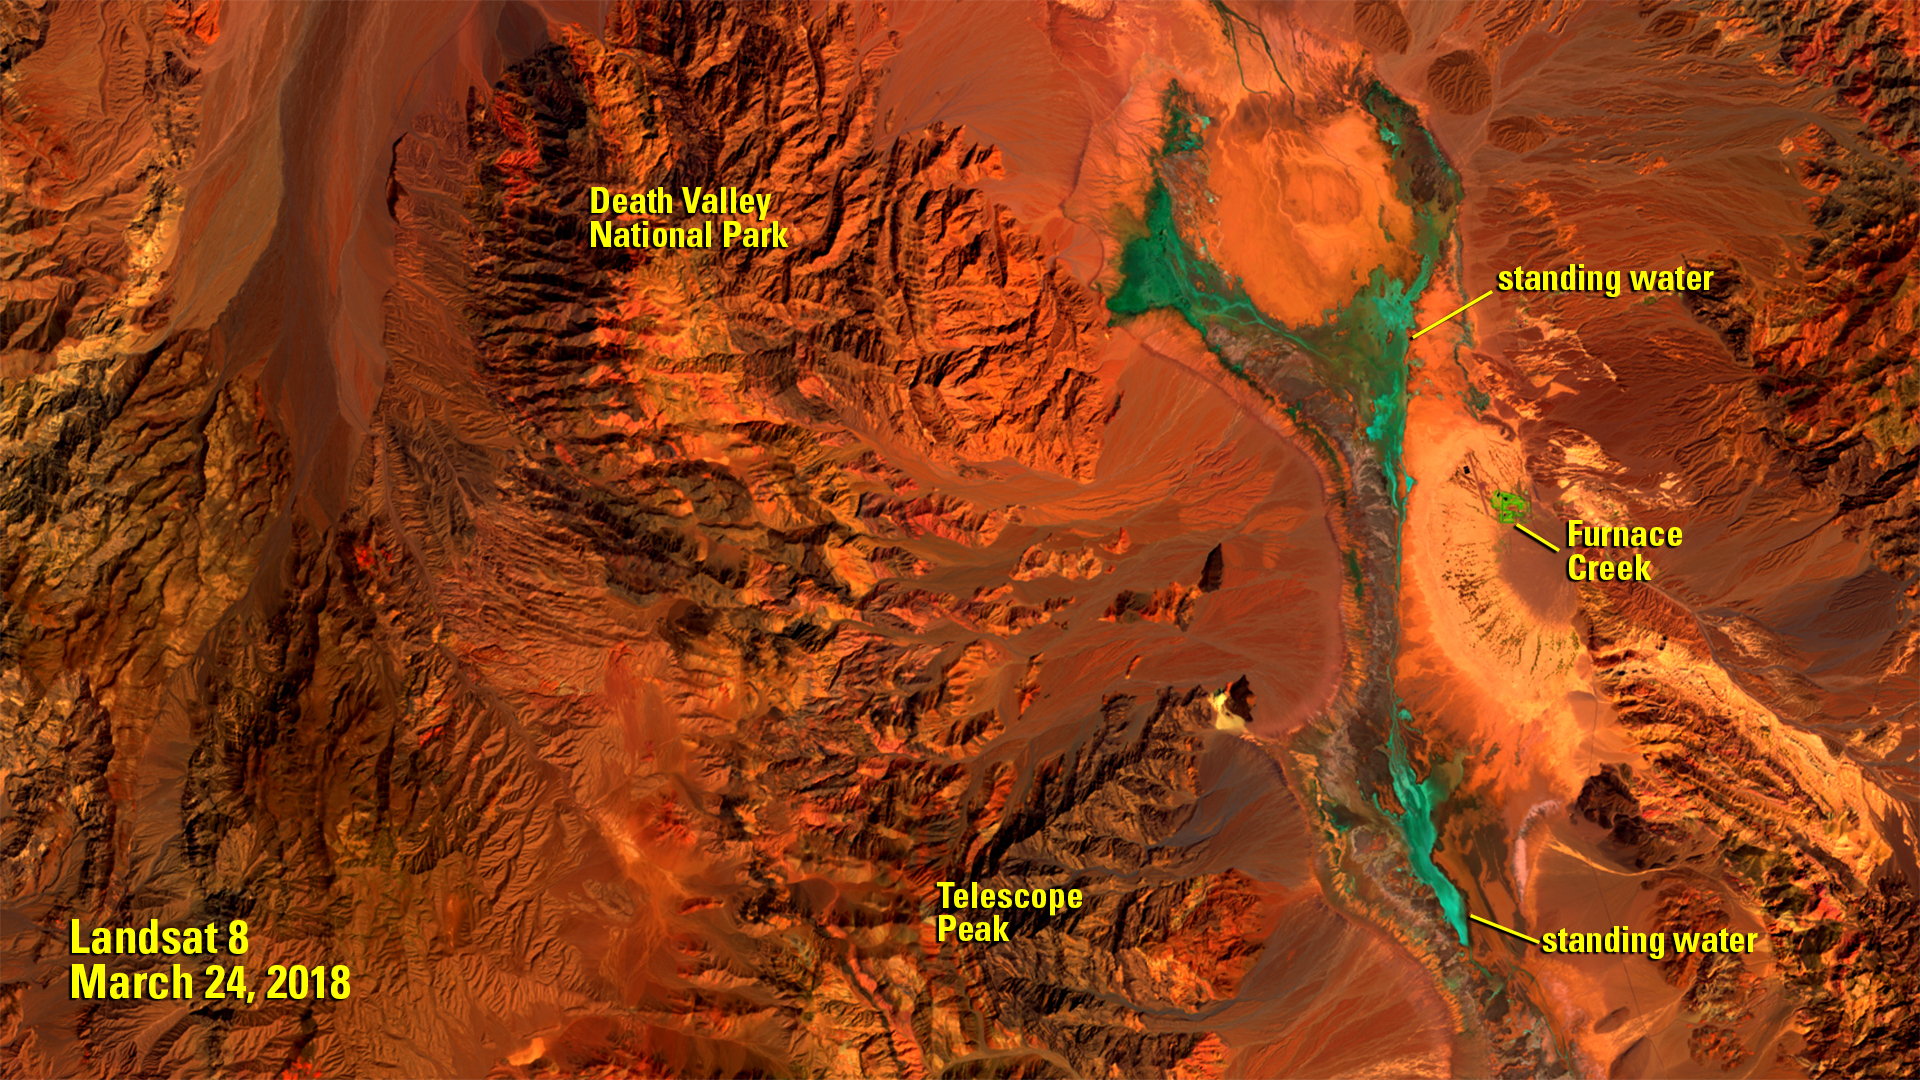 Landsat image of Death Valley, CA from March 24, 2018